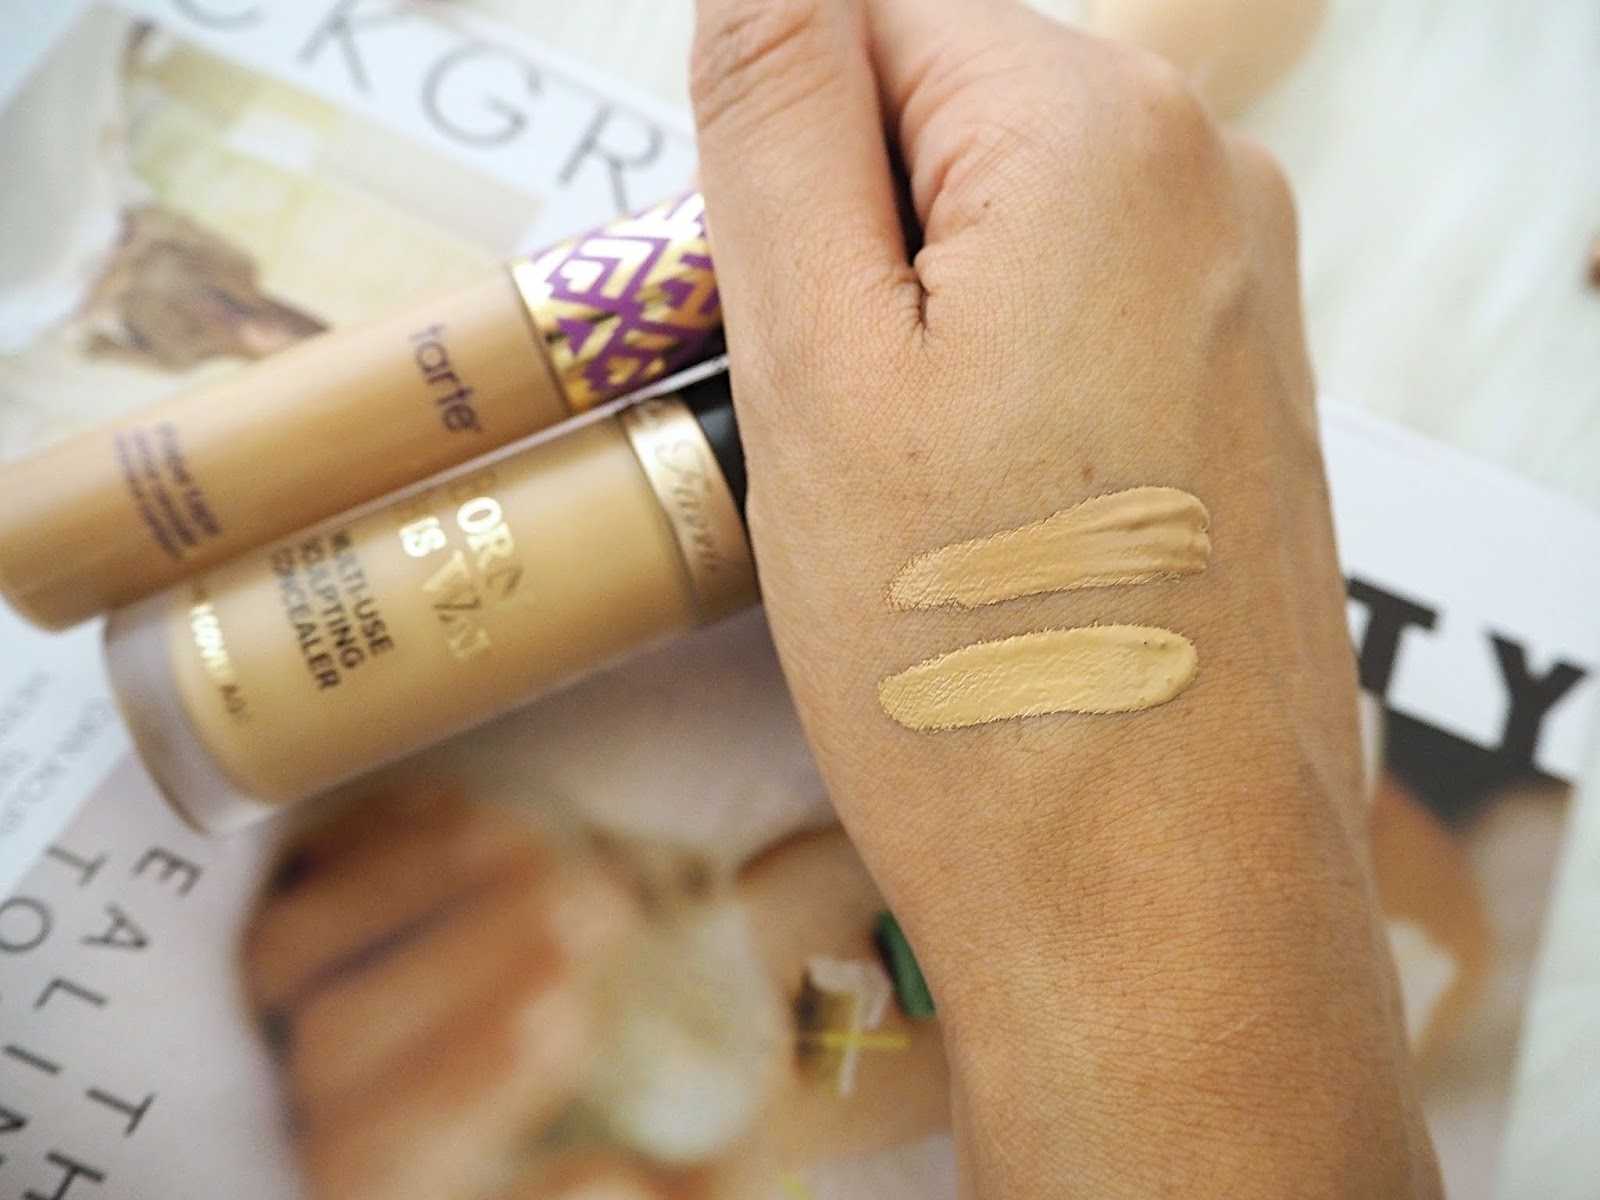 I tested tarte's shape tape concealer and didn't need a touch-up all day